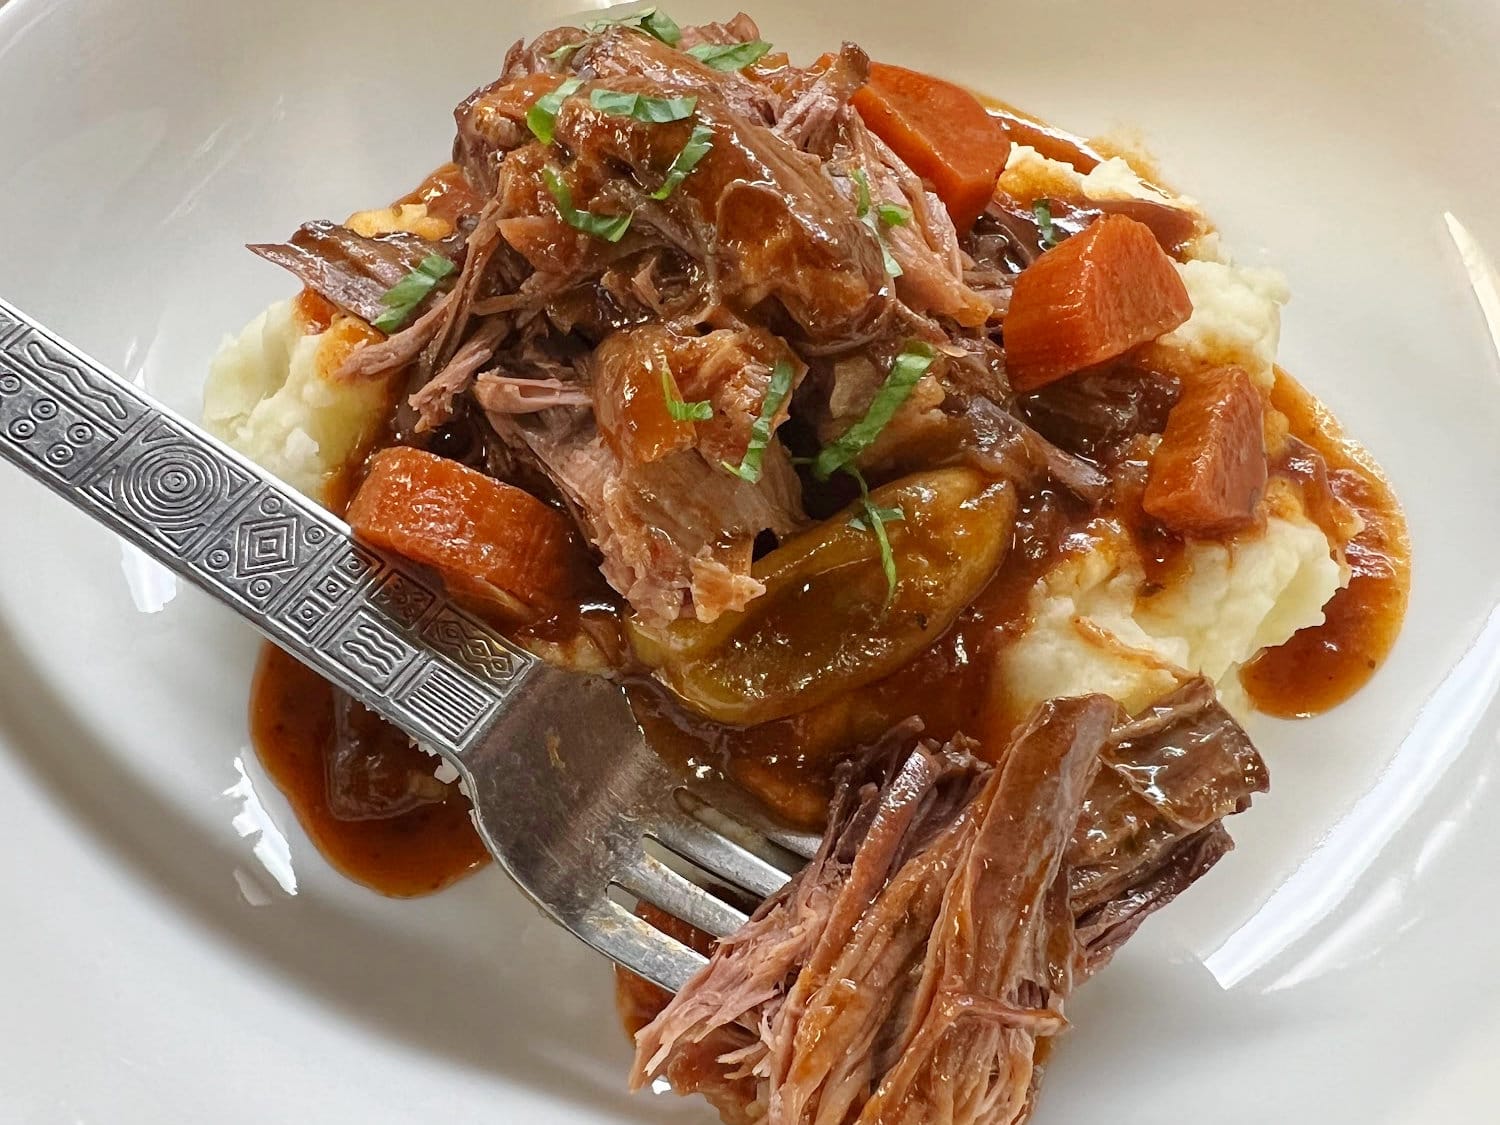 Chuck tender roast served with carrots, mashed potatoes, and gravy. 